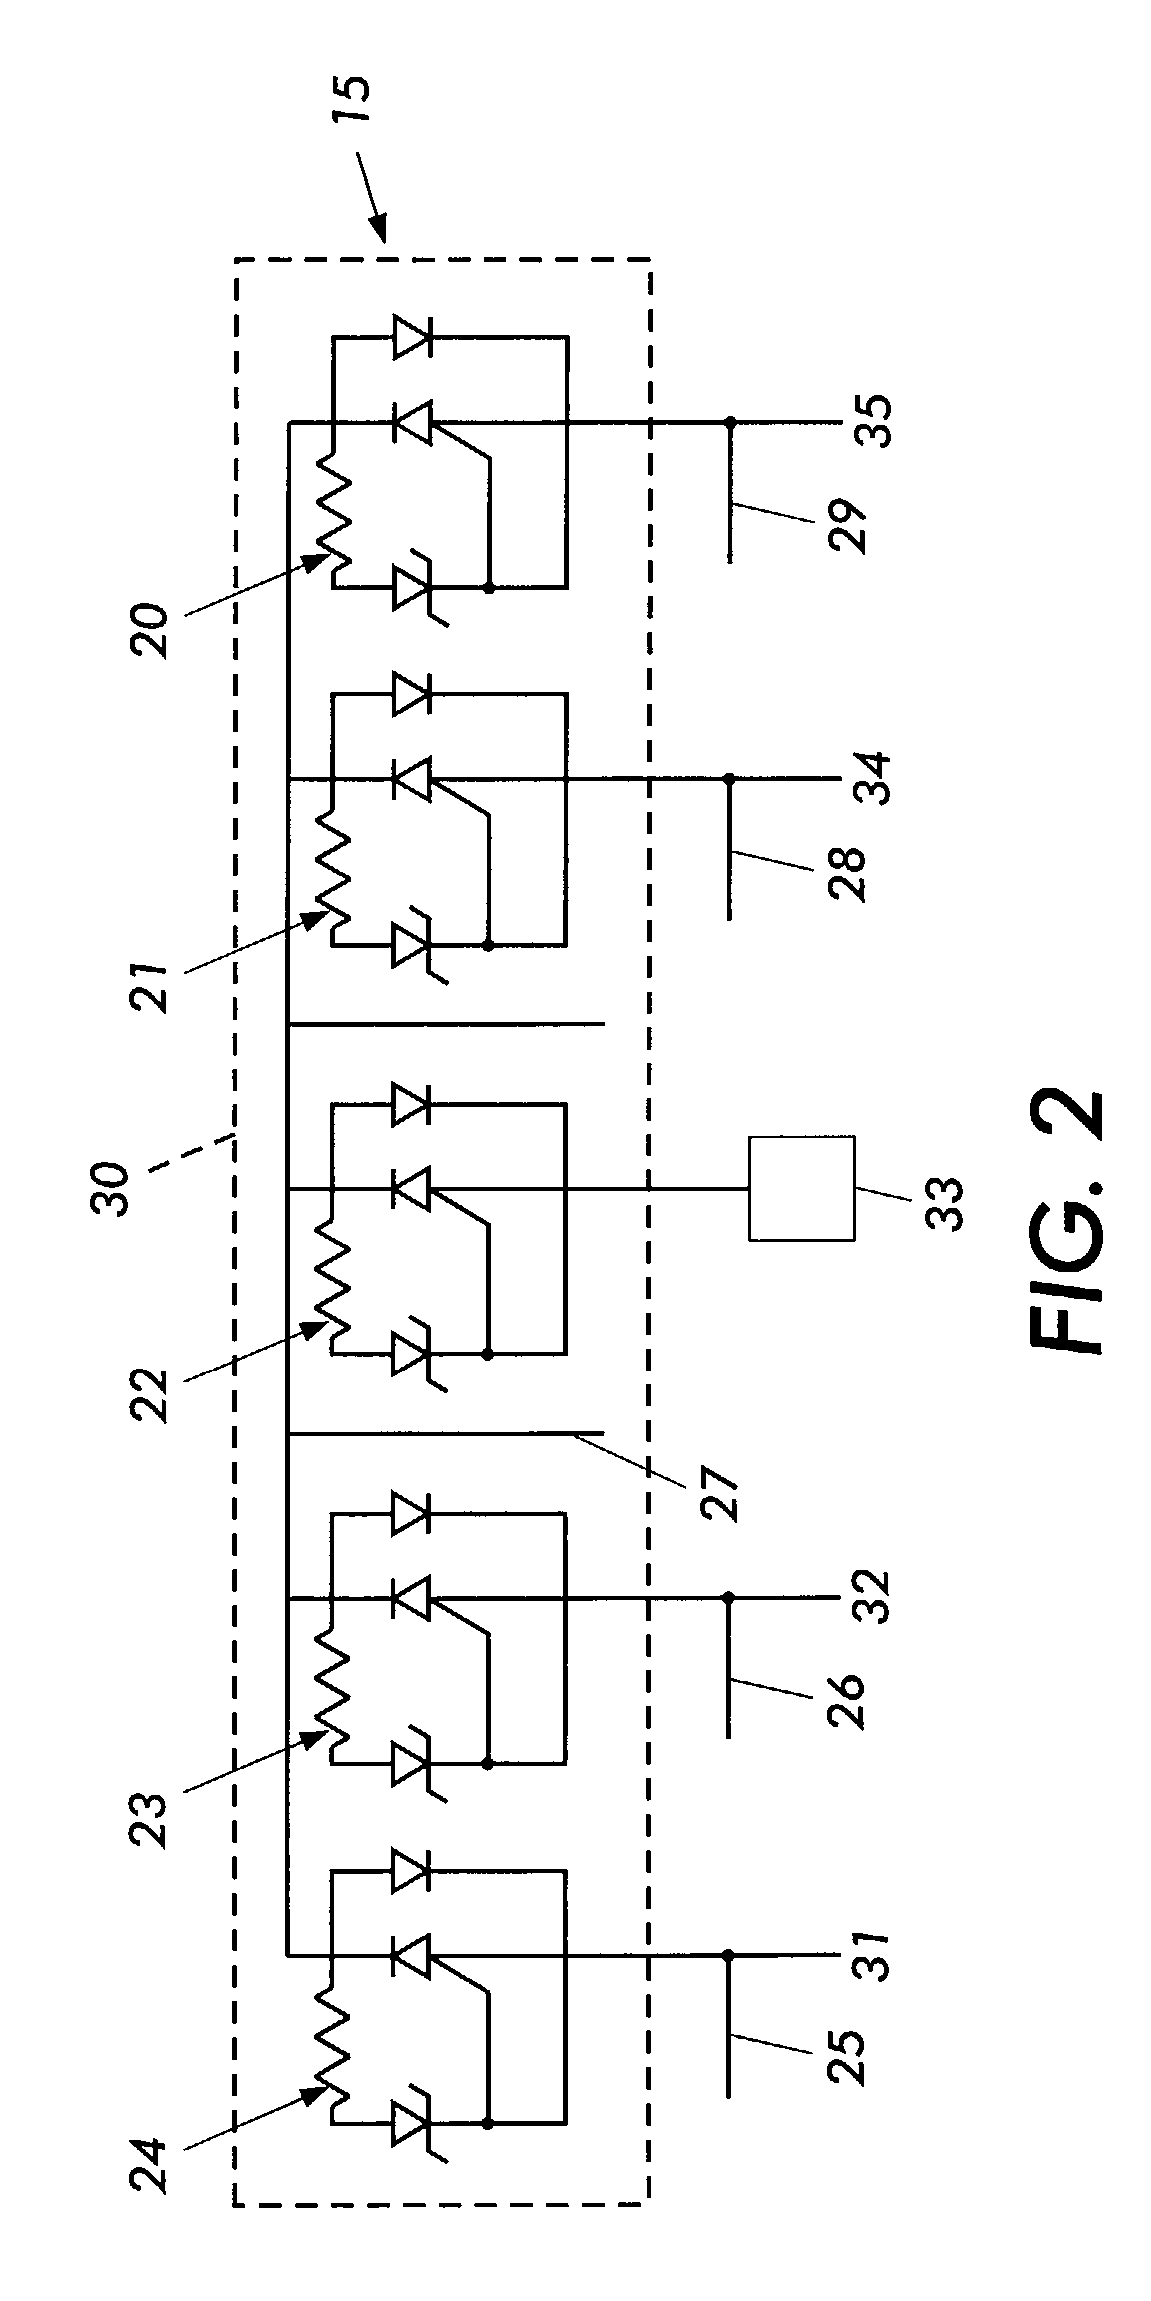 Electromagnetic interference immune tissue invasive system